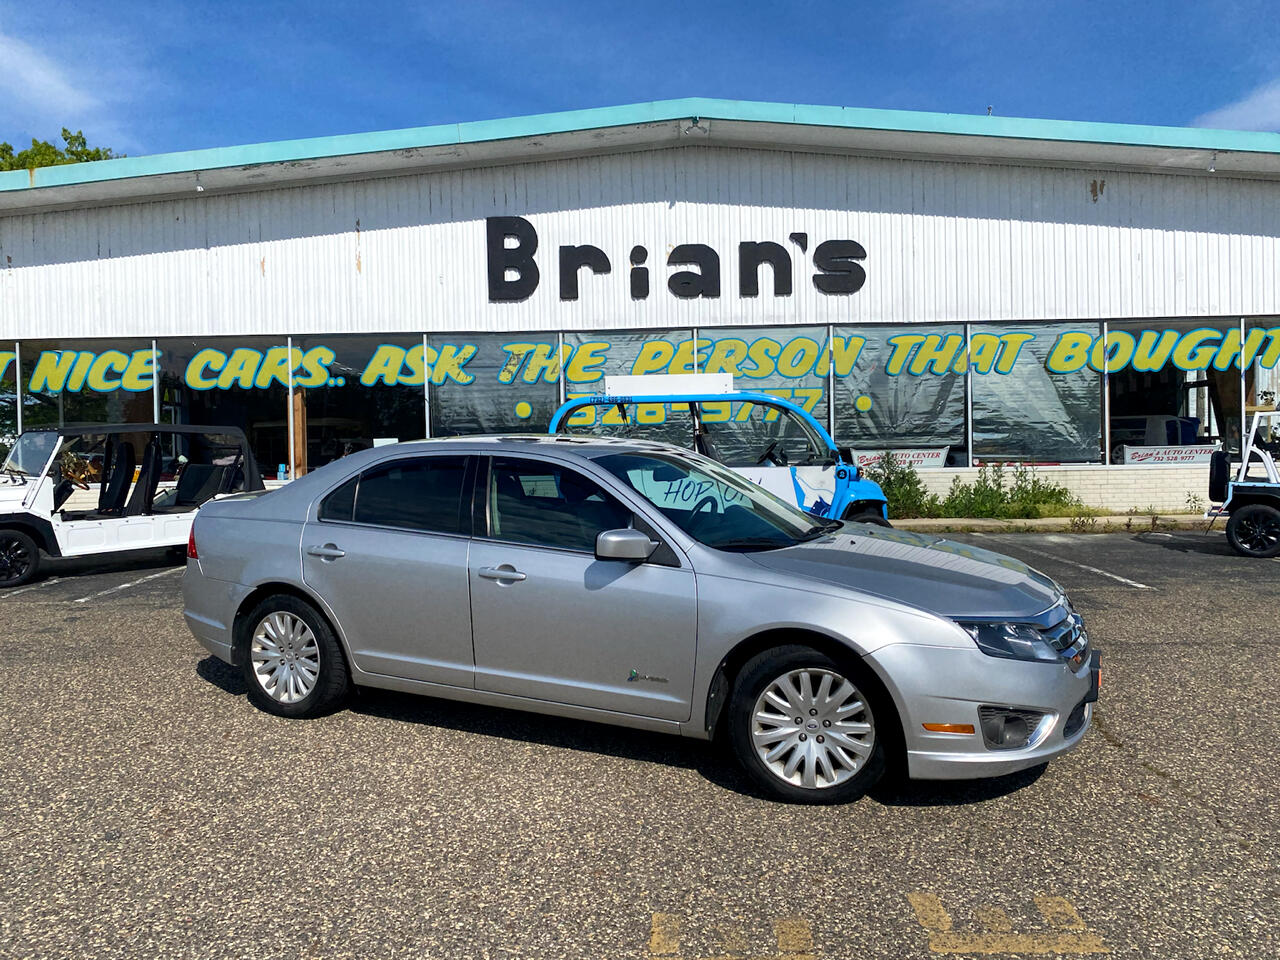 Used 2012 Ford Fusion 4dr Sdn Hybrid FWD for Sale in Manasquan NJ 08736  Brian's Auto Center